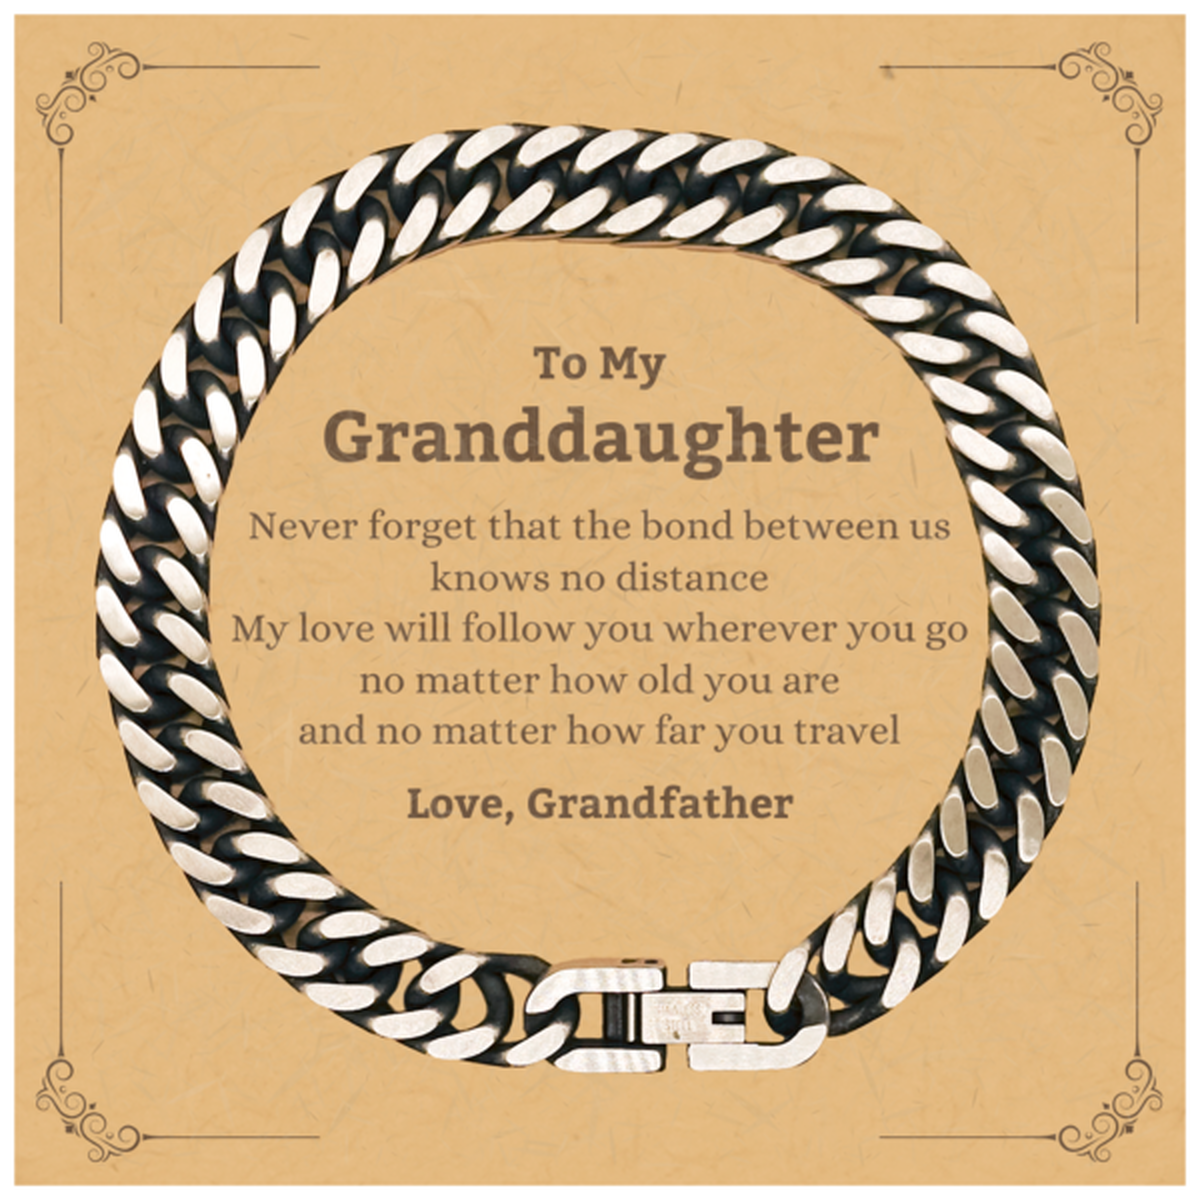 Granddaughter Birthday Gifts from Grandfather, Adjustable Cuban Link Chain Bracelet for Granddaughter Christmas Graduation Unique Gifts Granddaughter Never forget that the bond between us knows no distance. Love, Grandfather